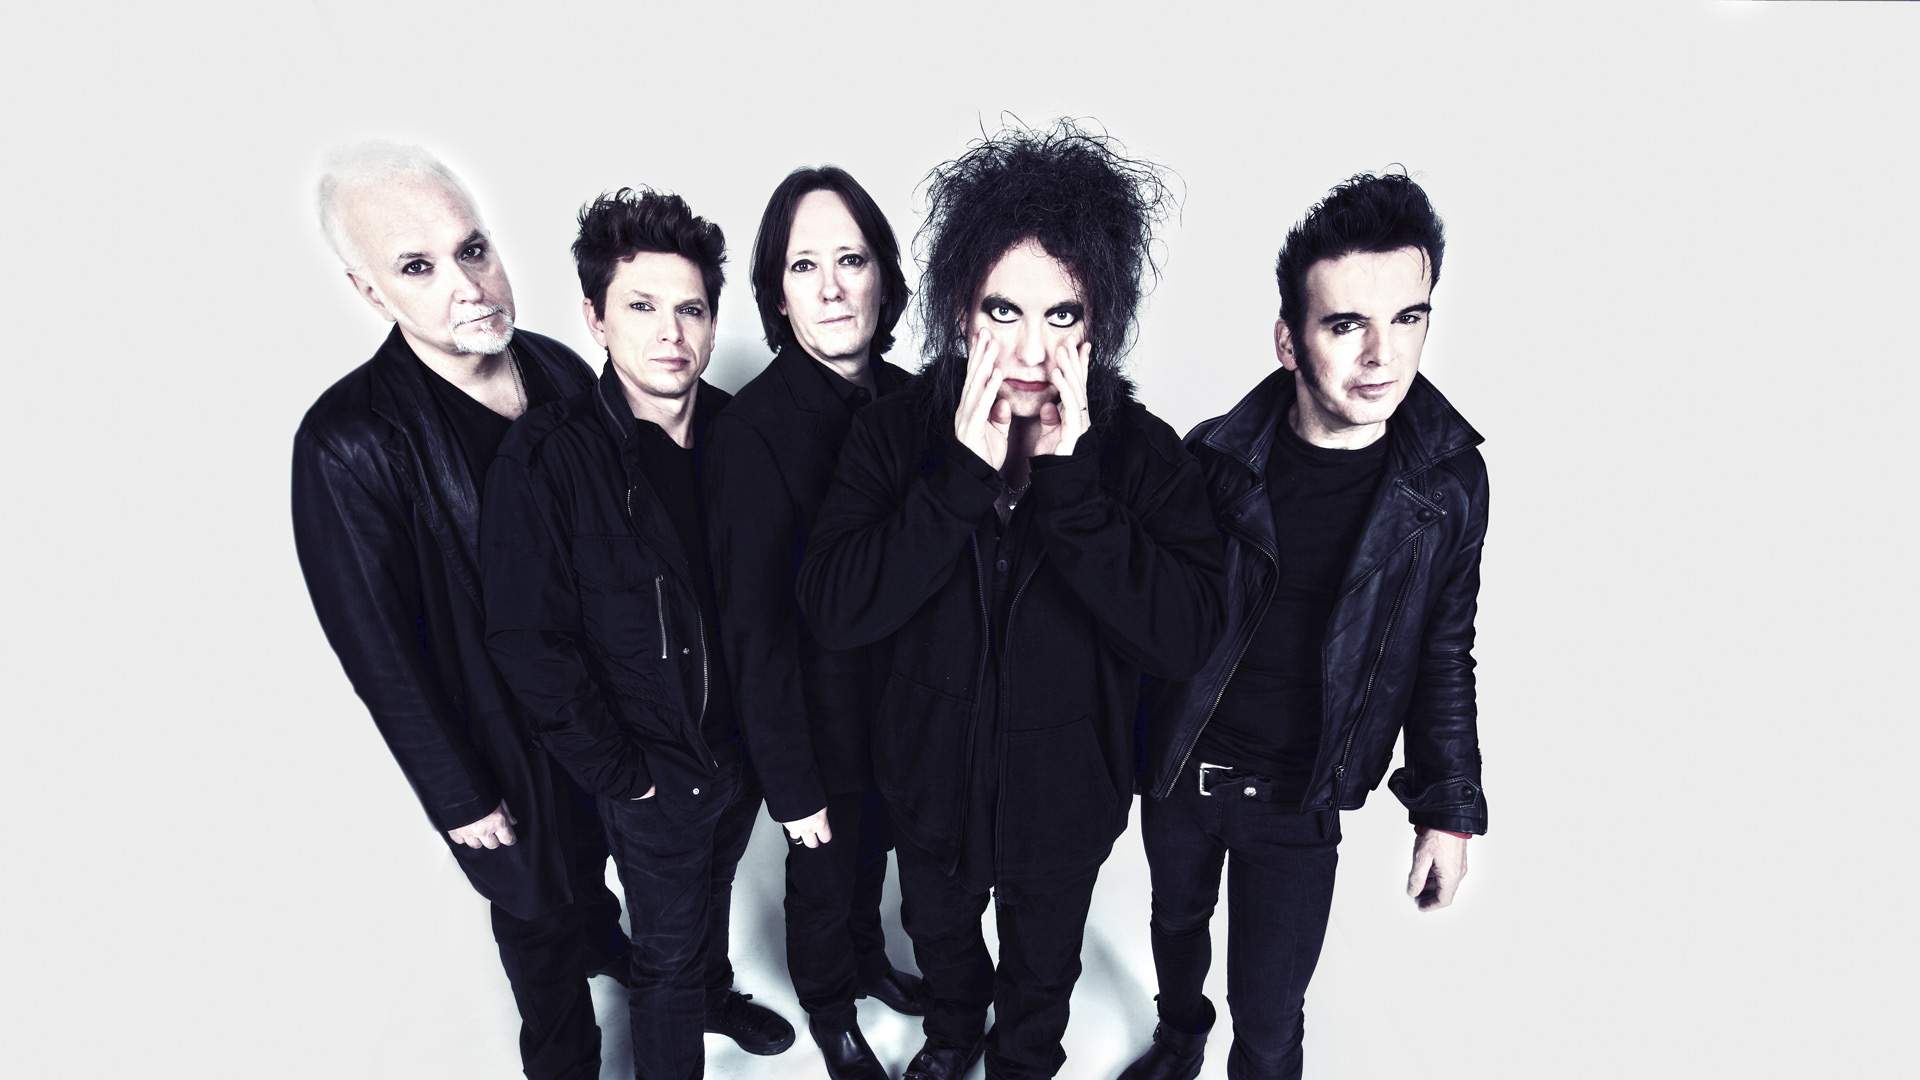 Legendary Post-Punk Band The Cure to Headline Vivid Live 2019